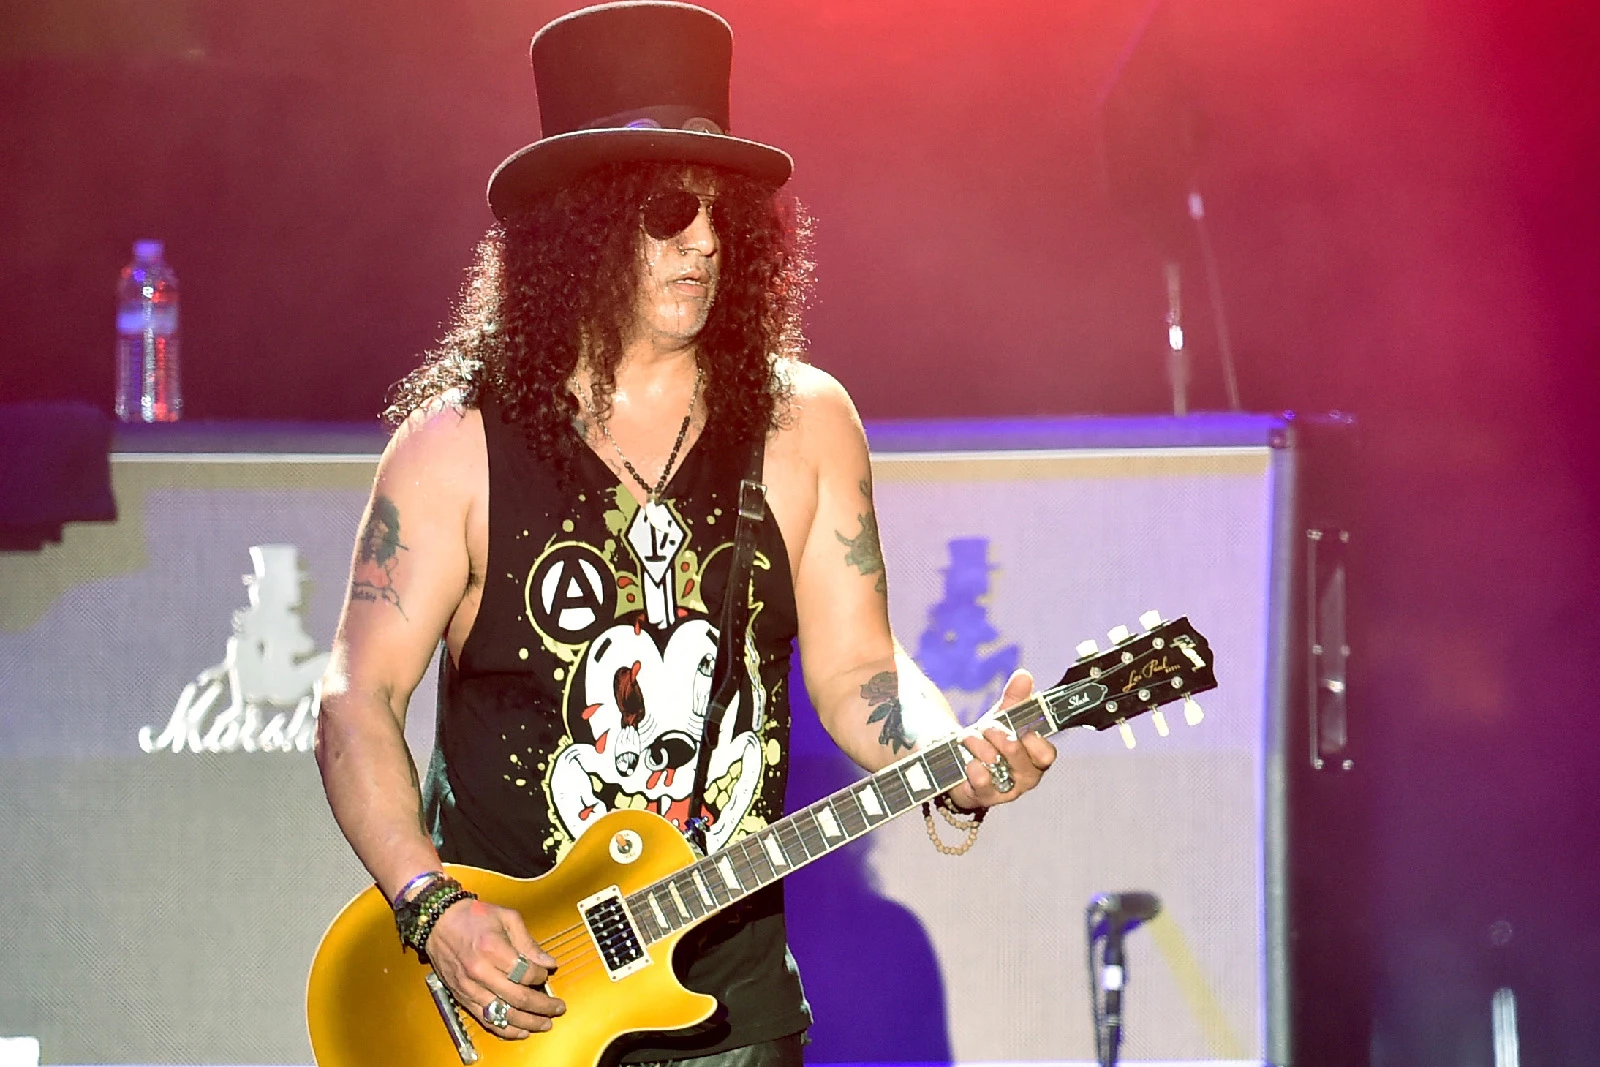 How Slash and Guns N' Roses Got Past Their Drama to Become a Sure Thing  Live - WSJ